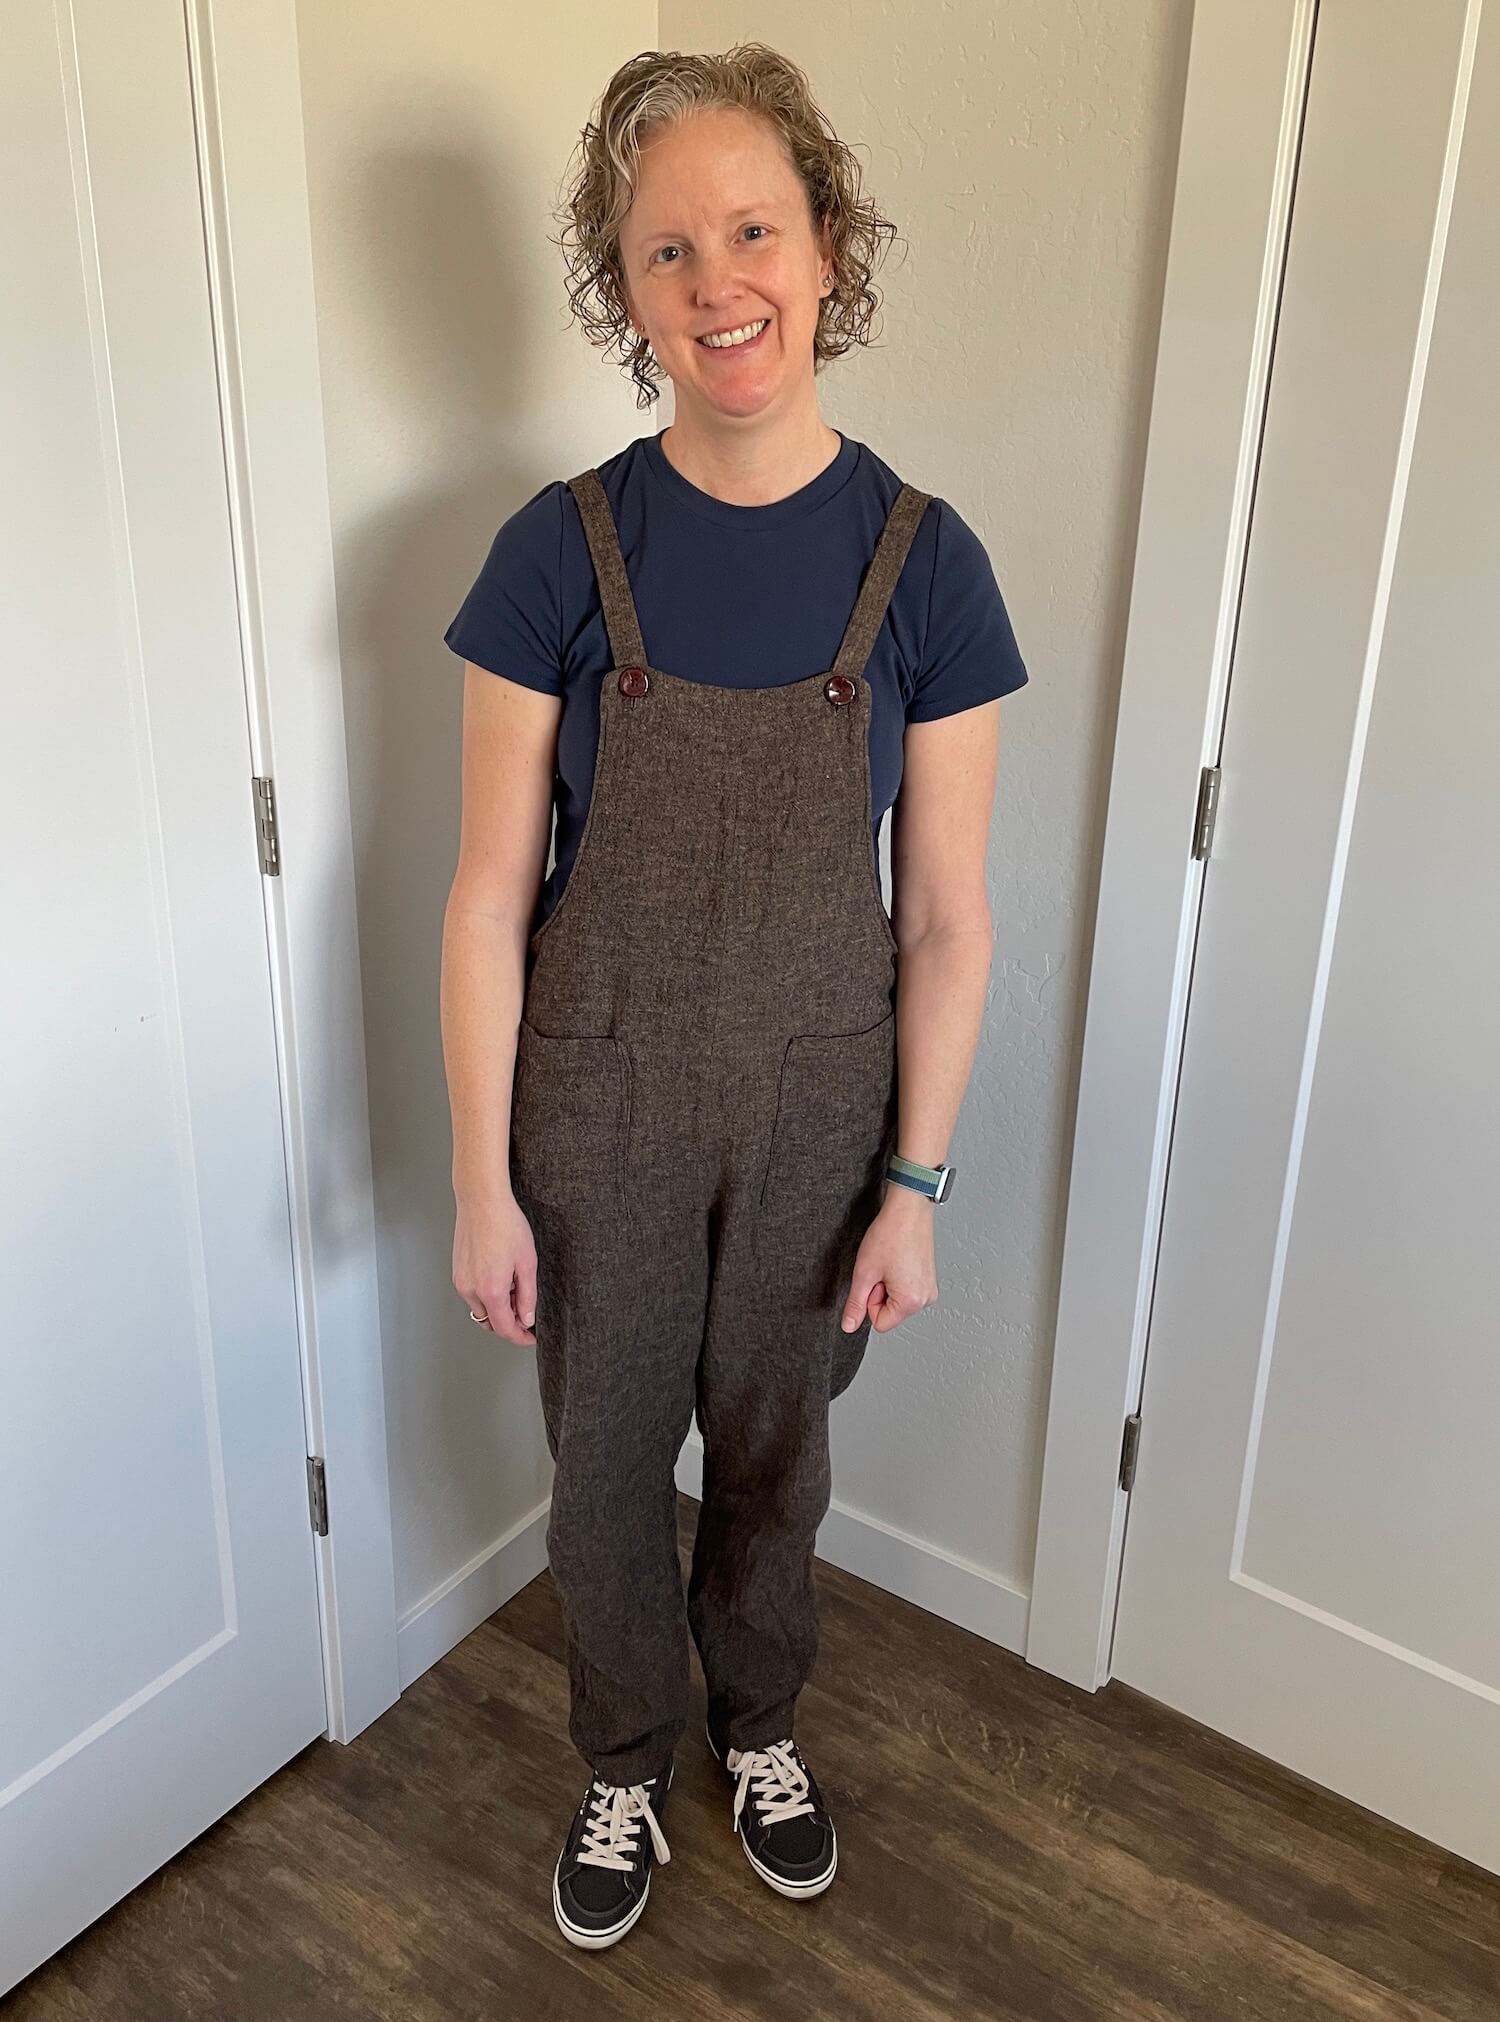 Me, standing in front of a corner of a room with doors on either side, wearing brown overalls with two patch pockets and buttons for the straps, a blue t-shirt underneath, and gray tennis shoes on my feet, my head is tilted to one side.